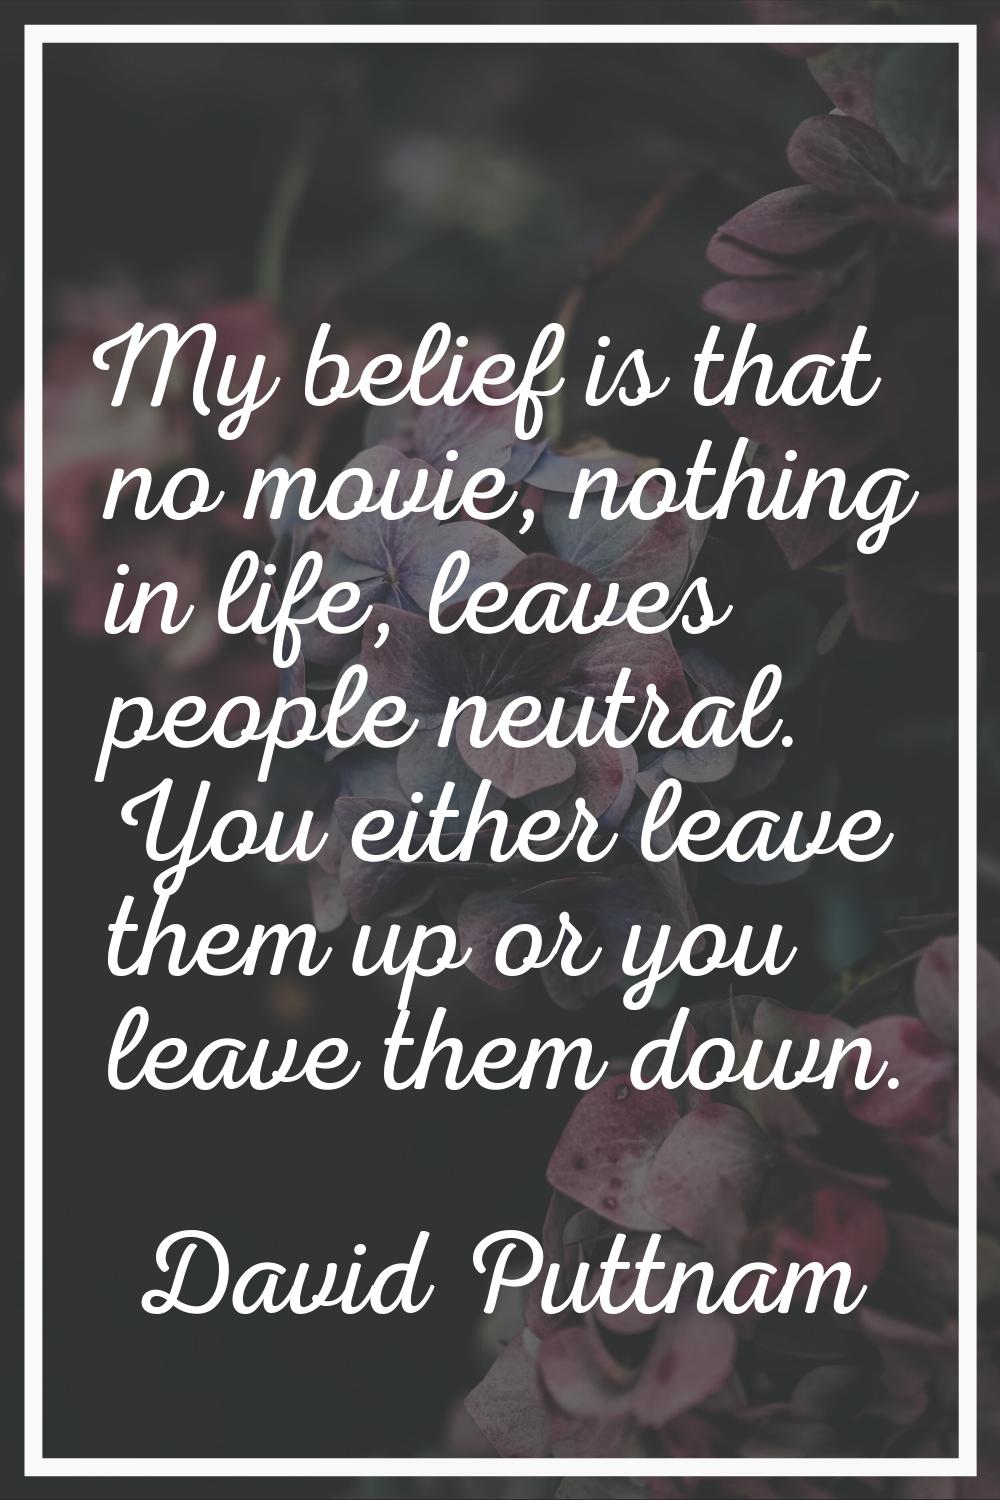 My belief is that no movie, nothing in life, leaves people neutral. You either leave them up or you